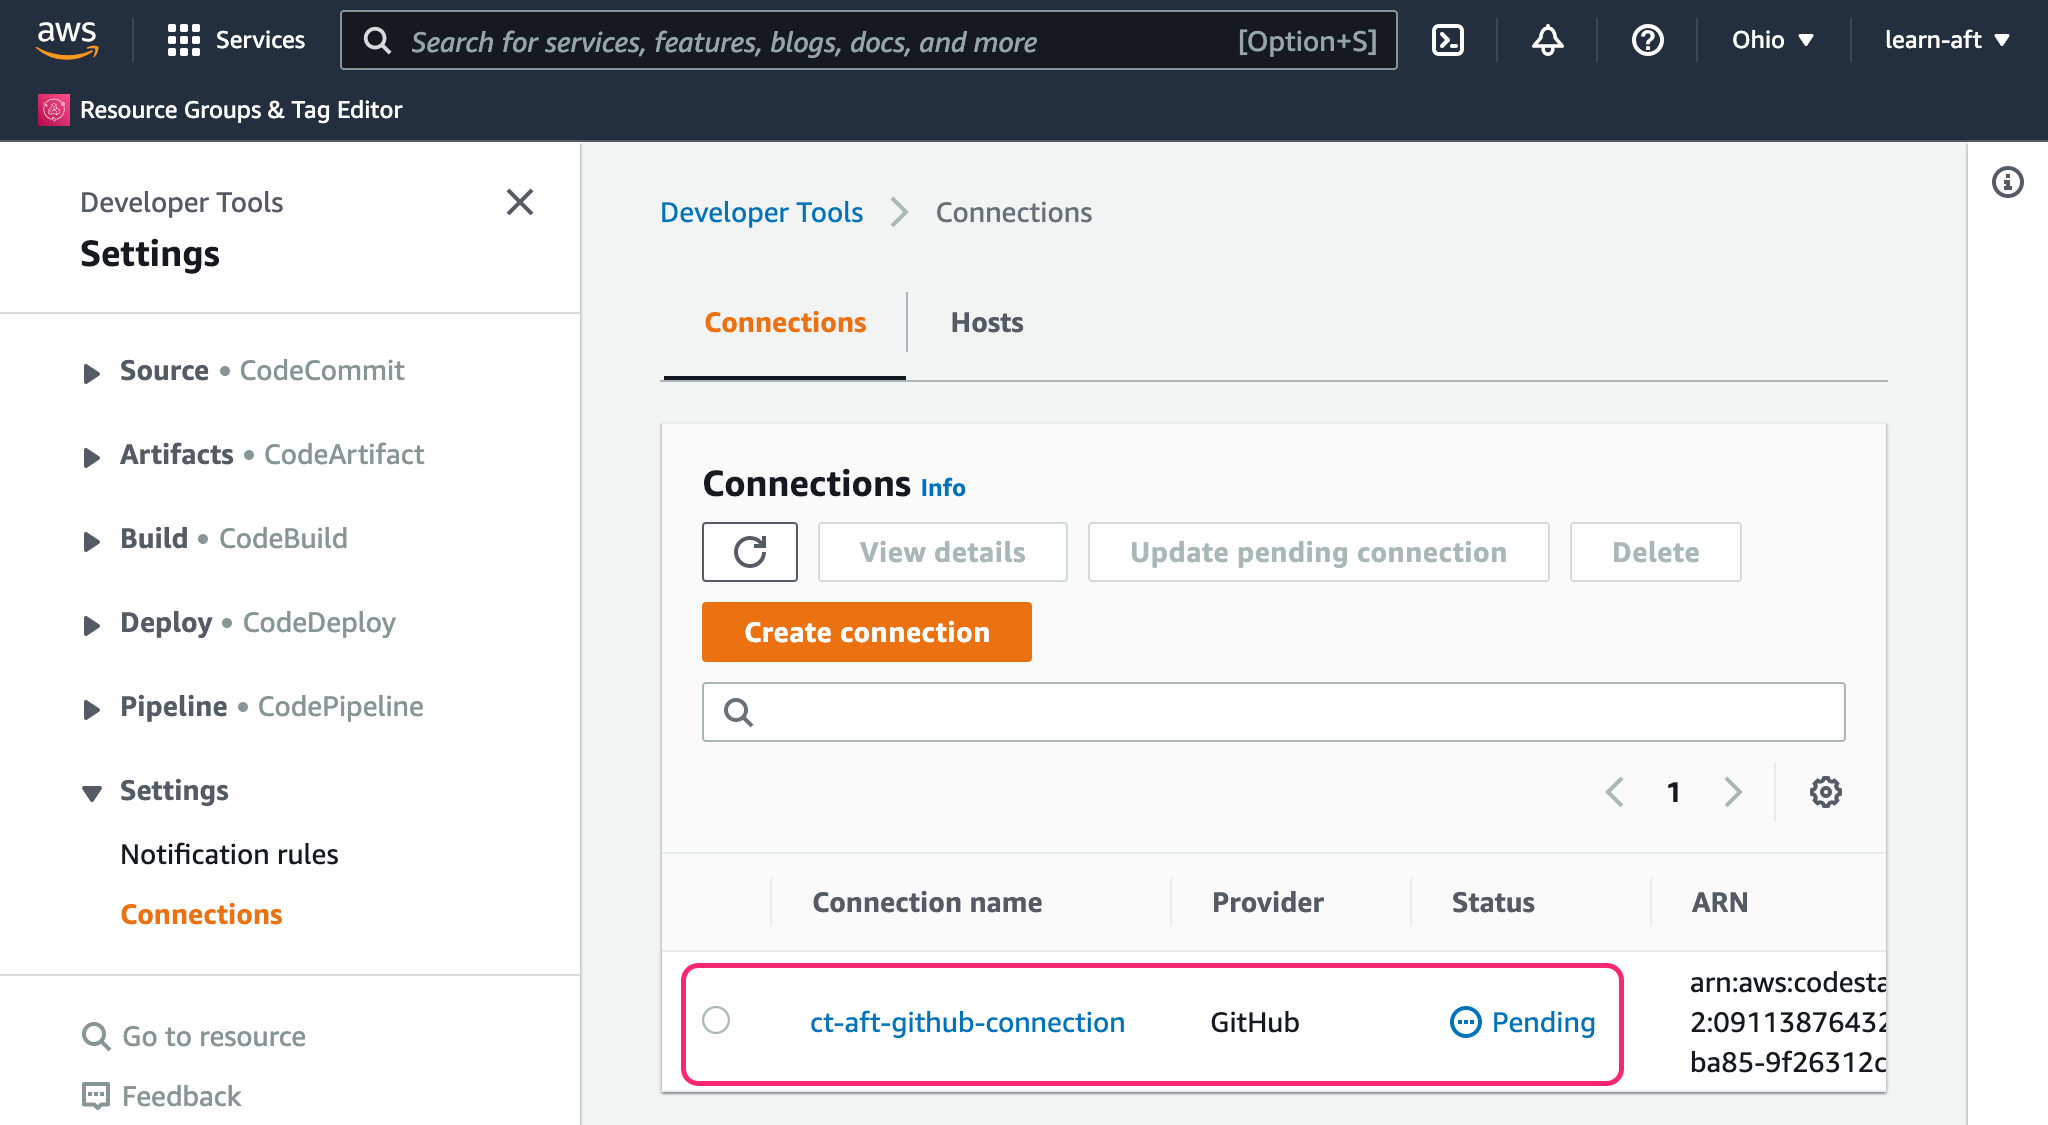 Pending AWS CodeSuite connections